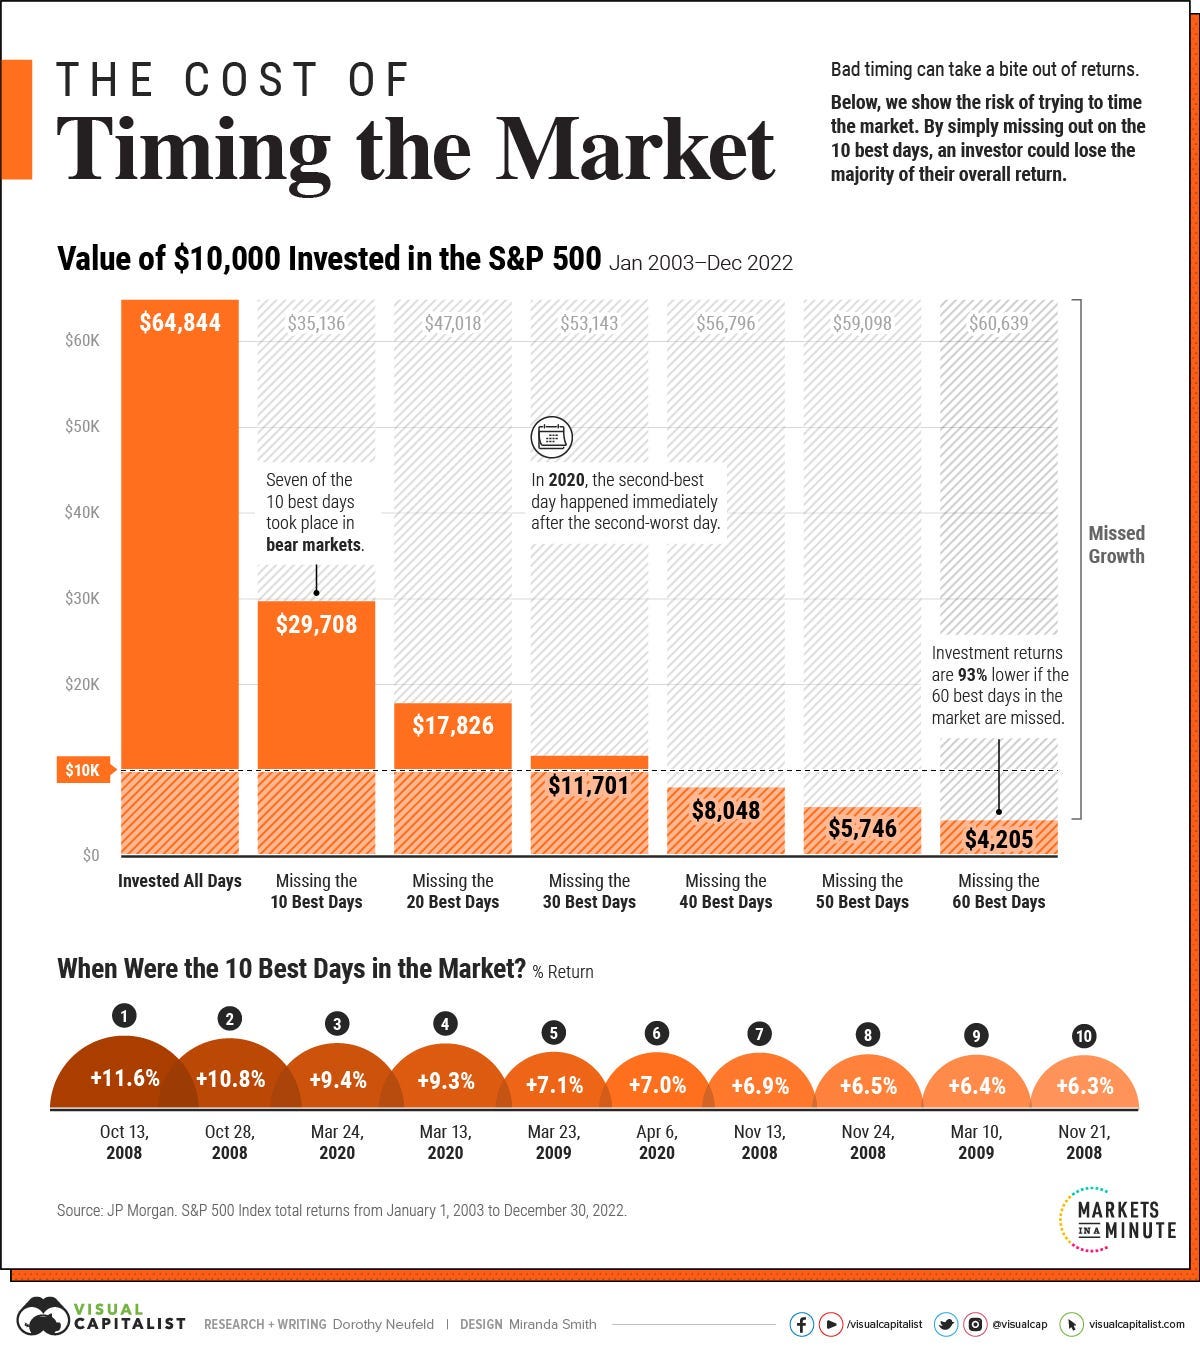 Timing the Market: Why It's So Hard, in One Chart